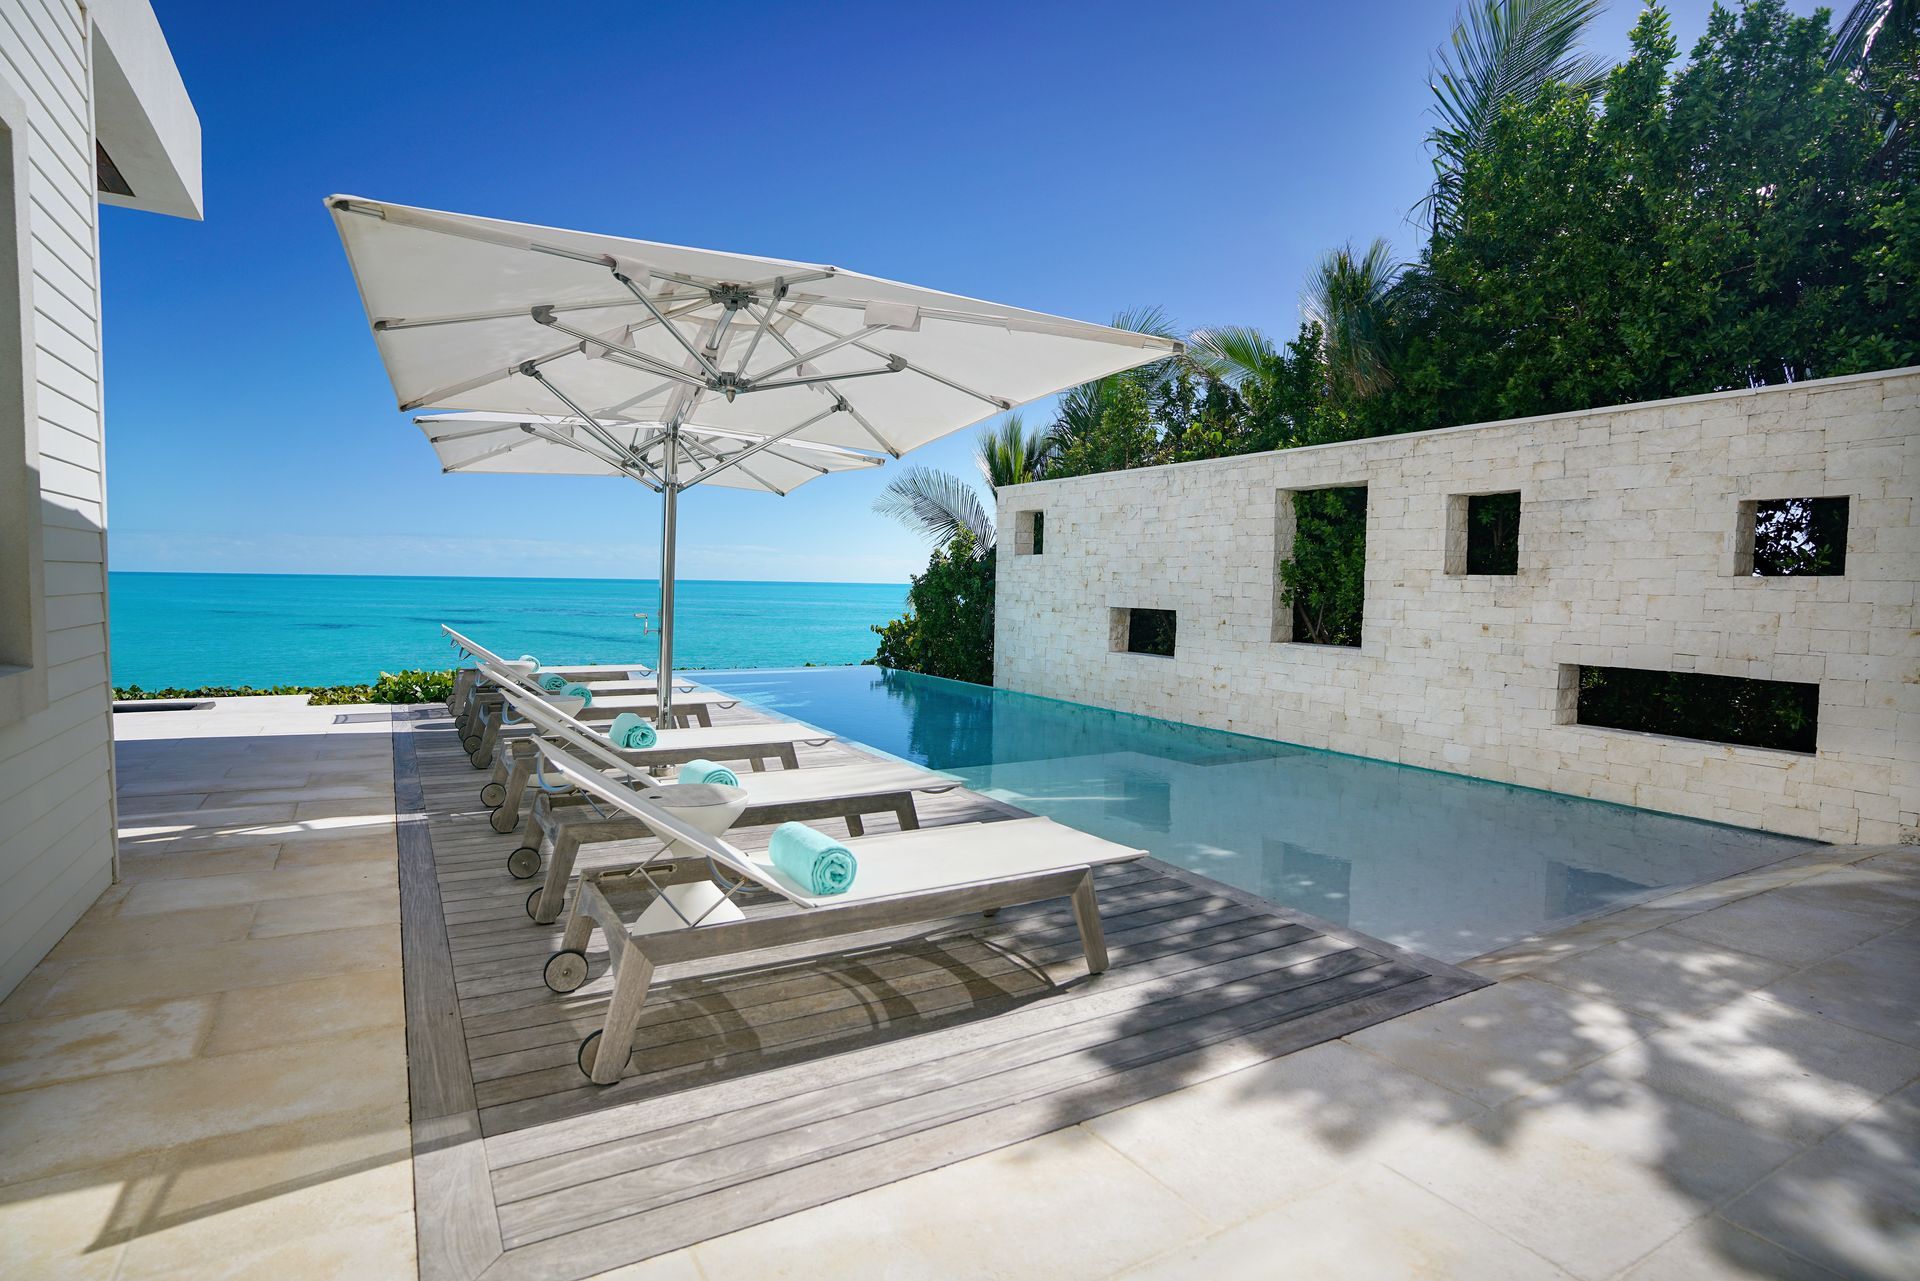 Four Bedroom Amuse Villas With Two Pools + Sun Deck + Water Slide + Beach